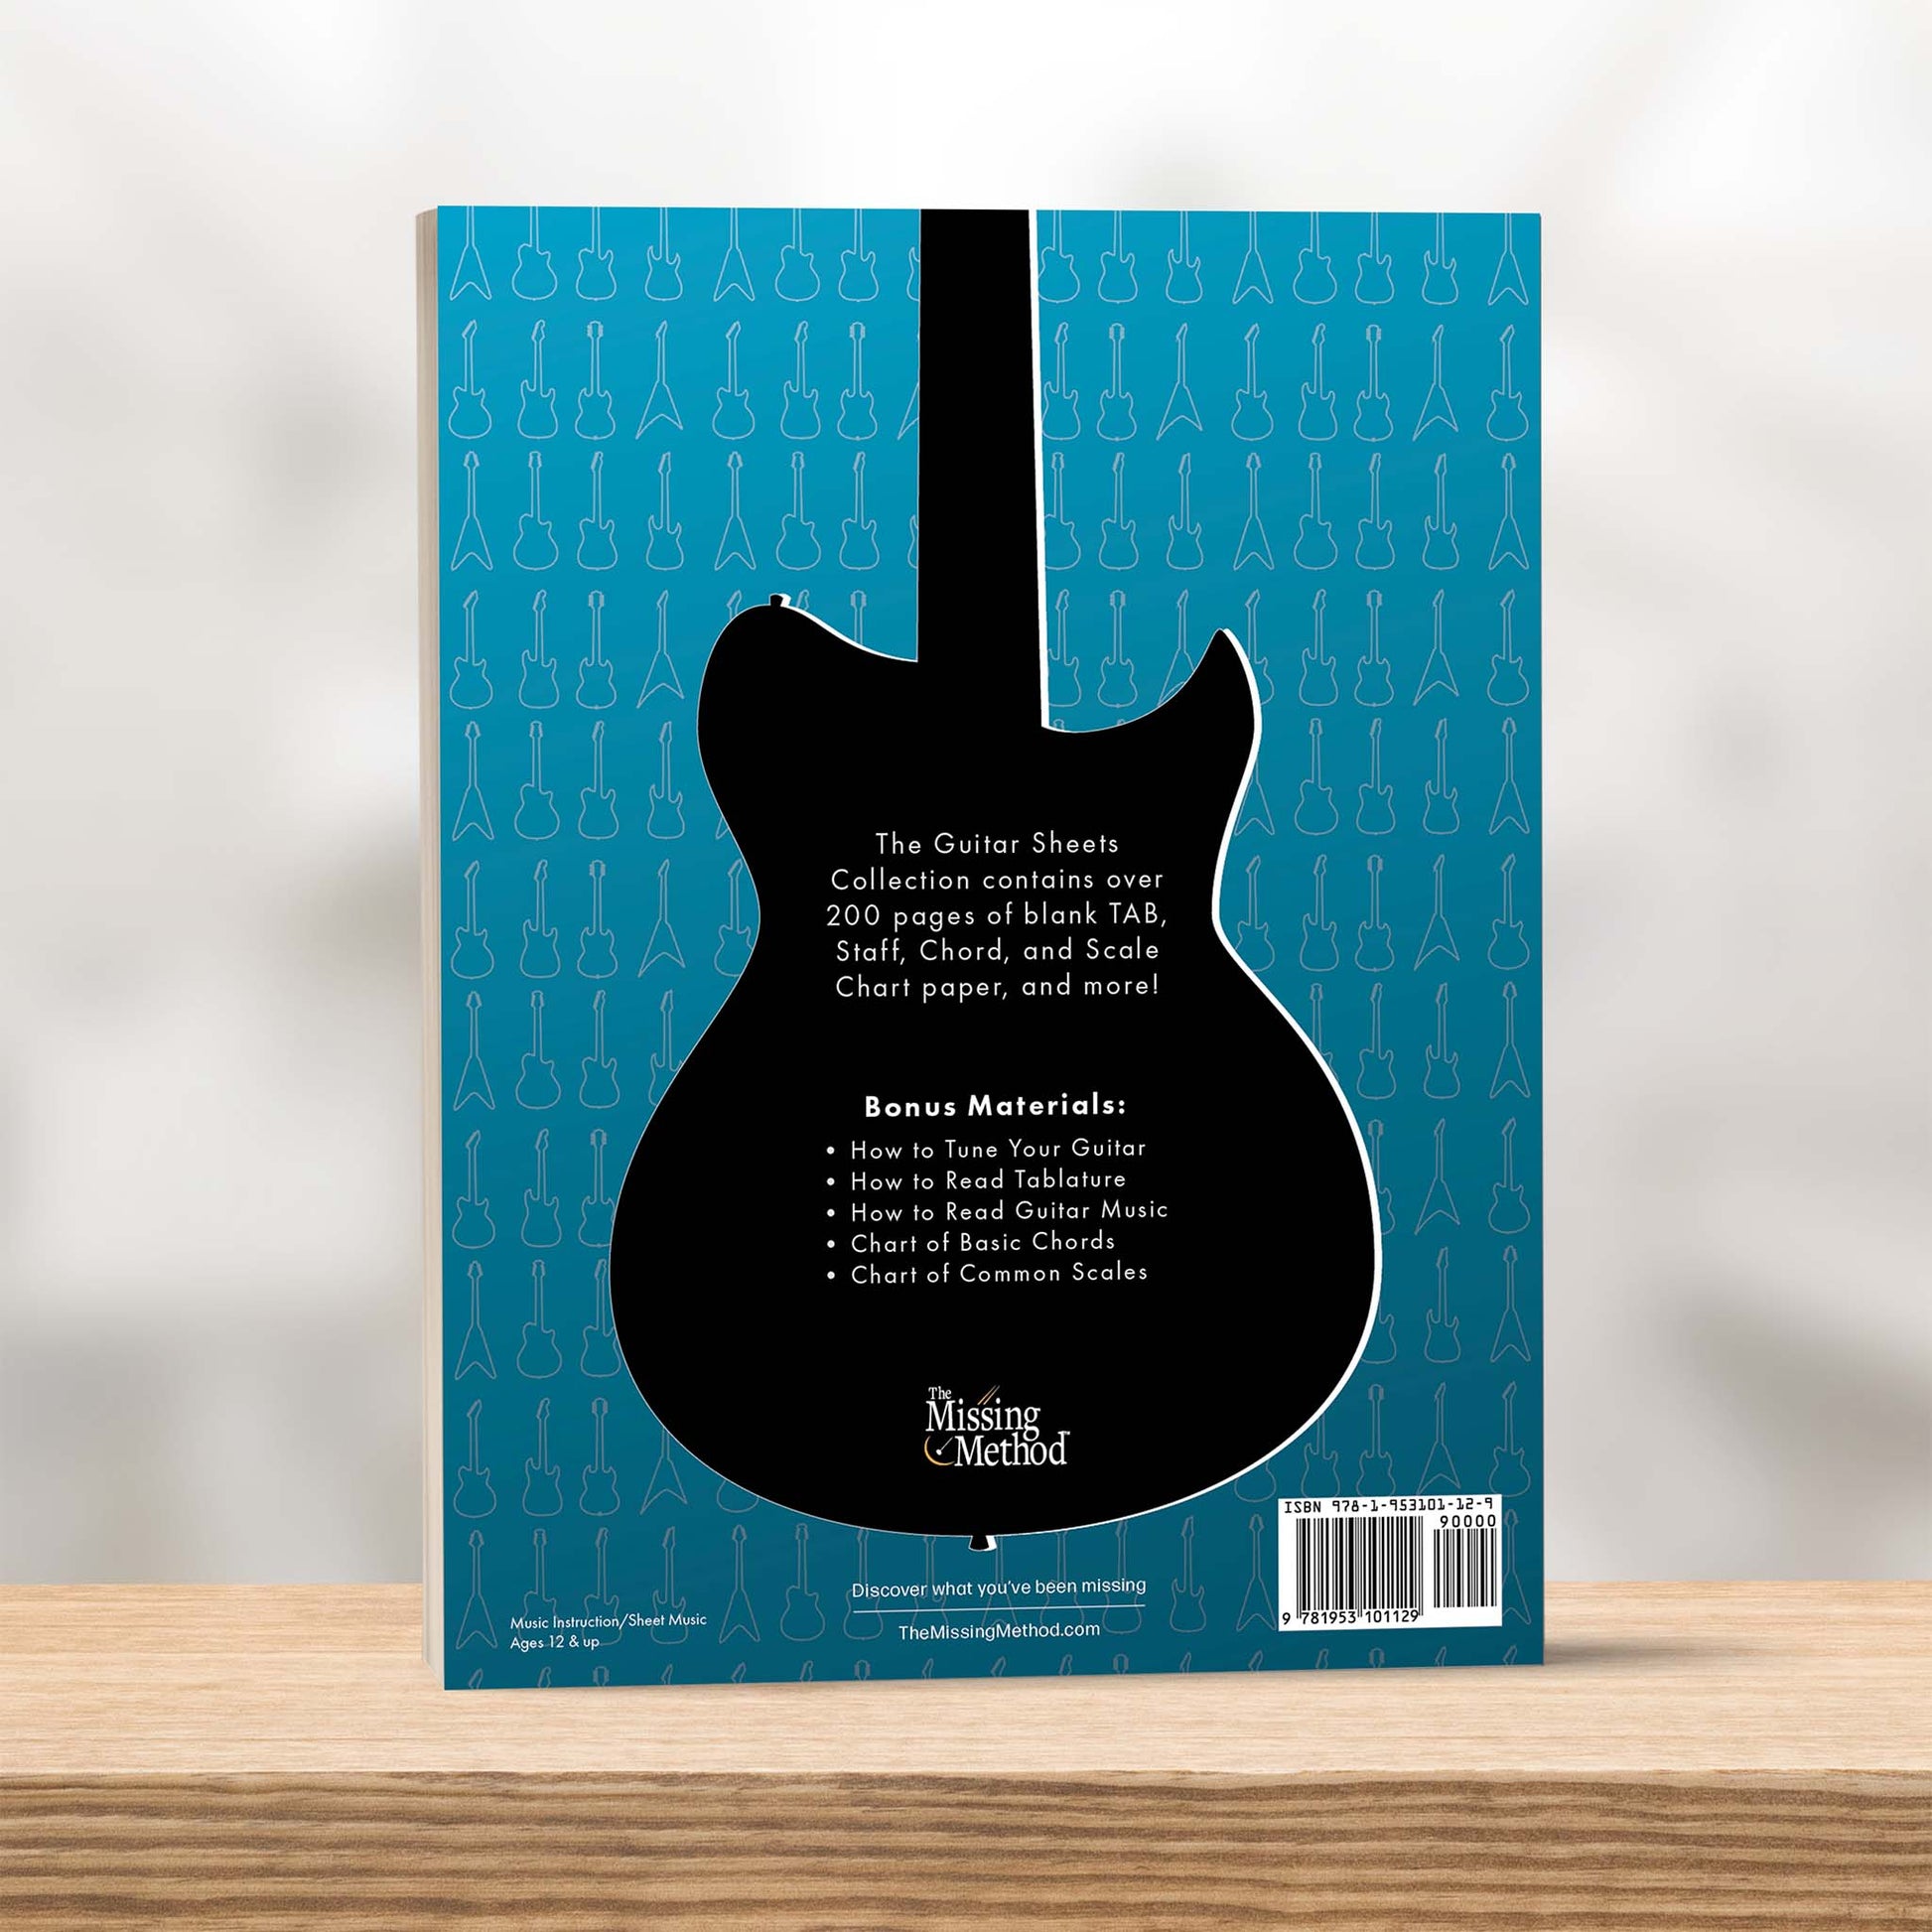 Guitar Sheets Collection Book on Shelf displaying back cover